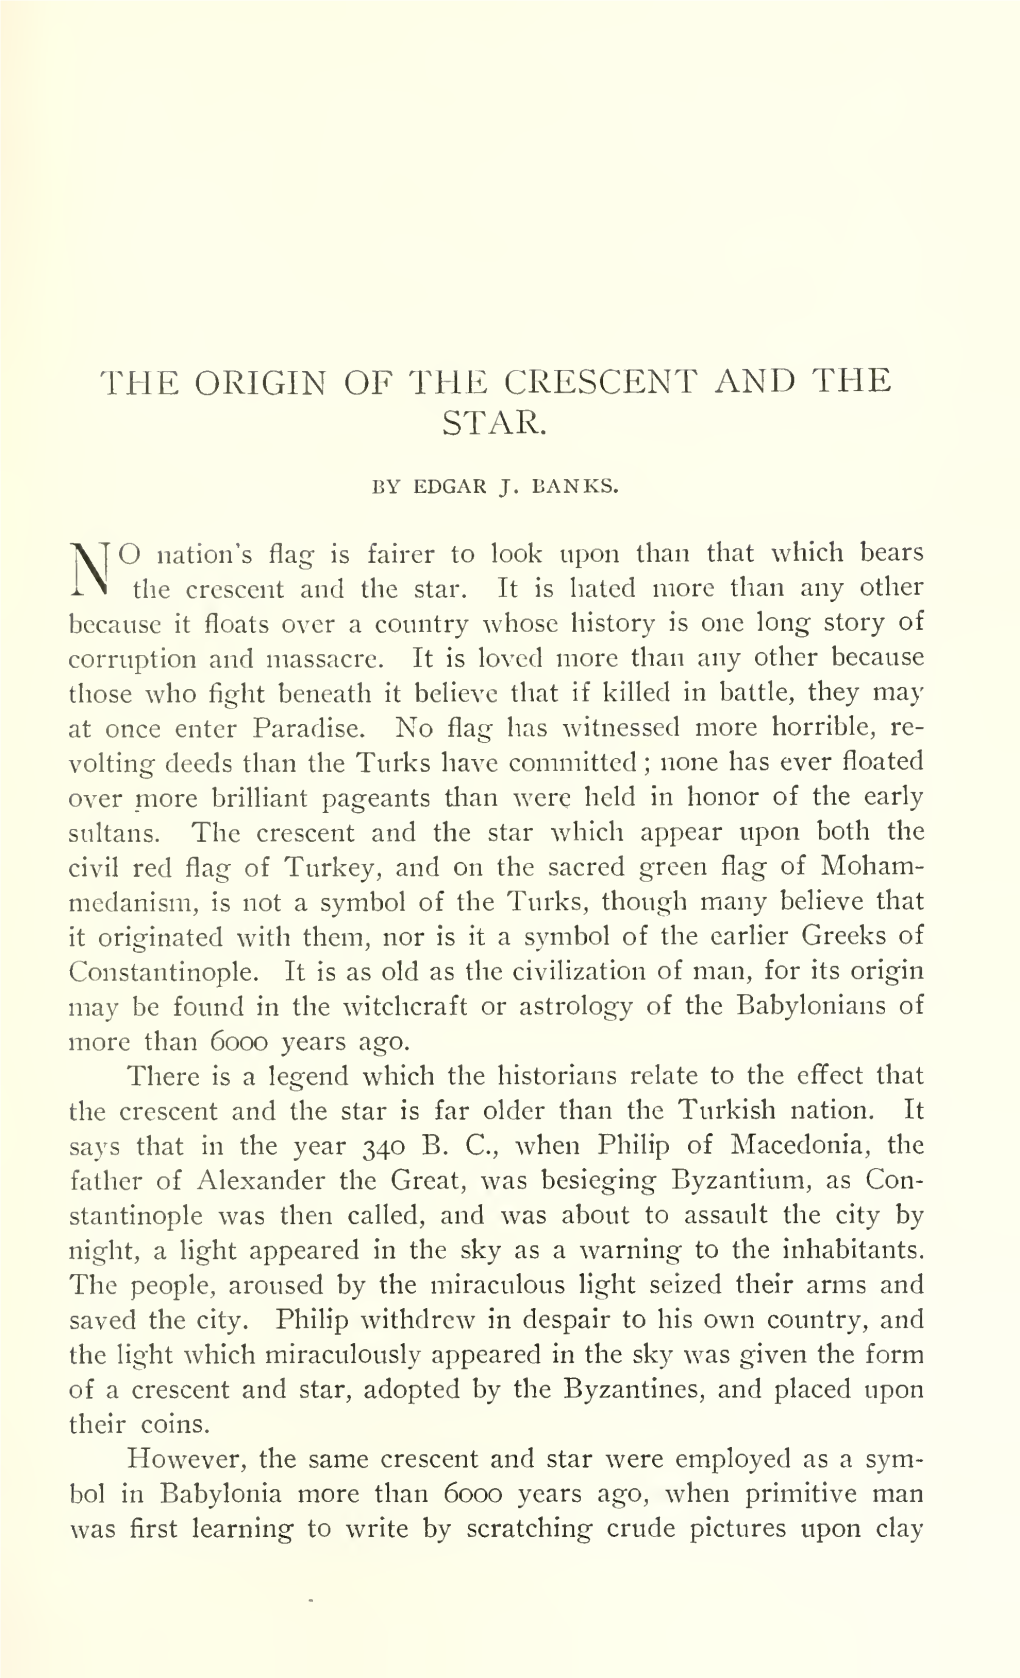 The Origin of the Crescent and the Star